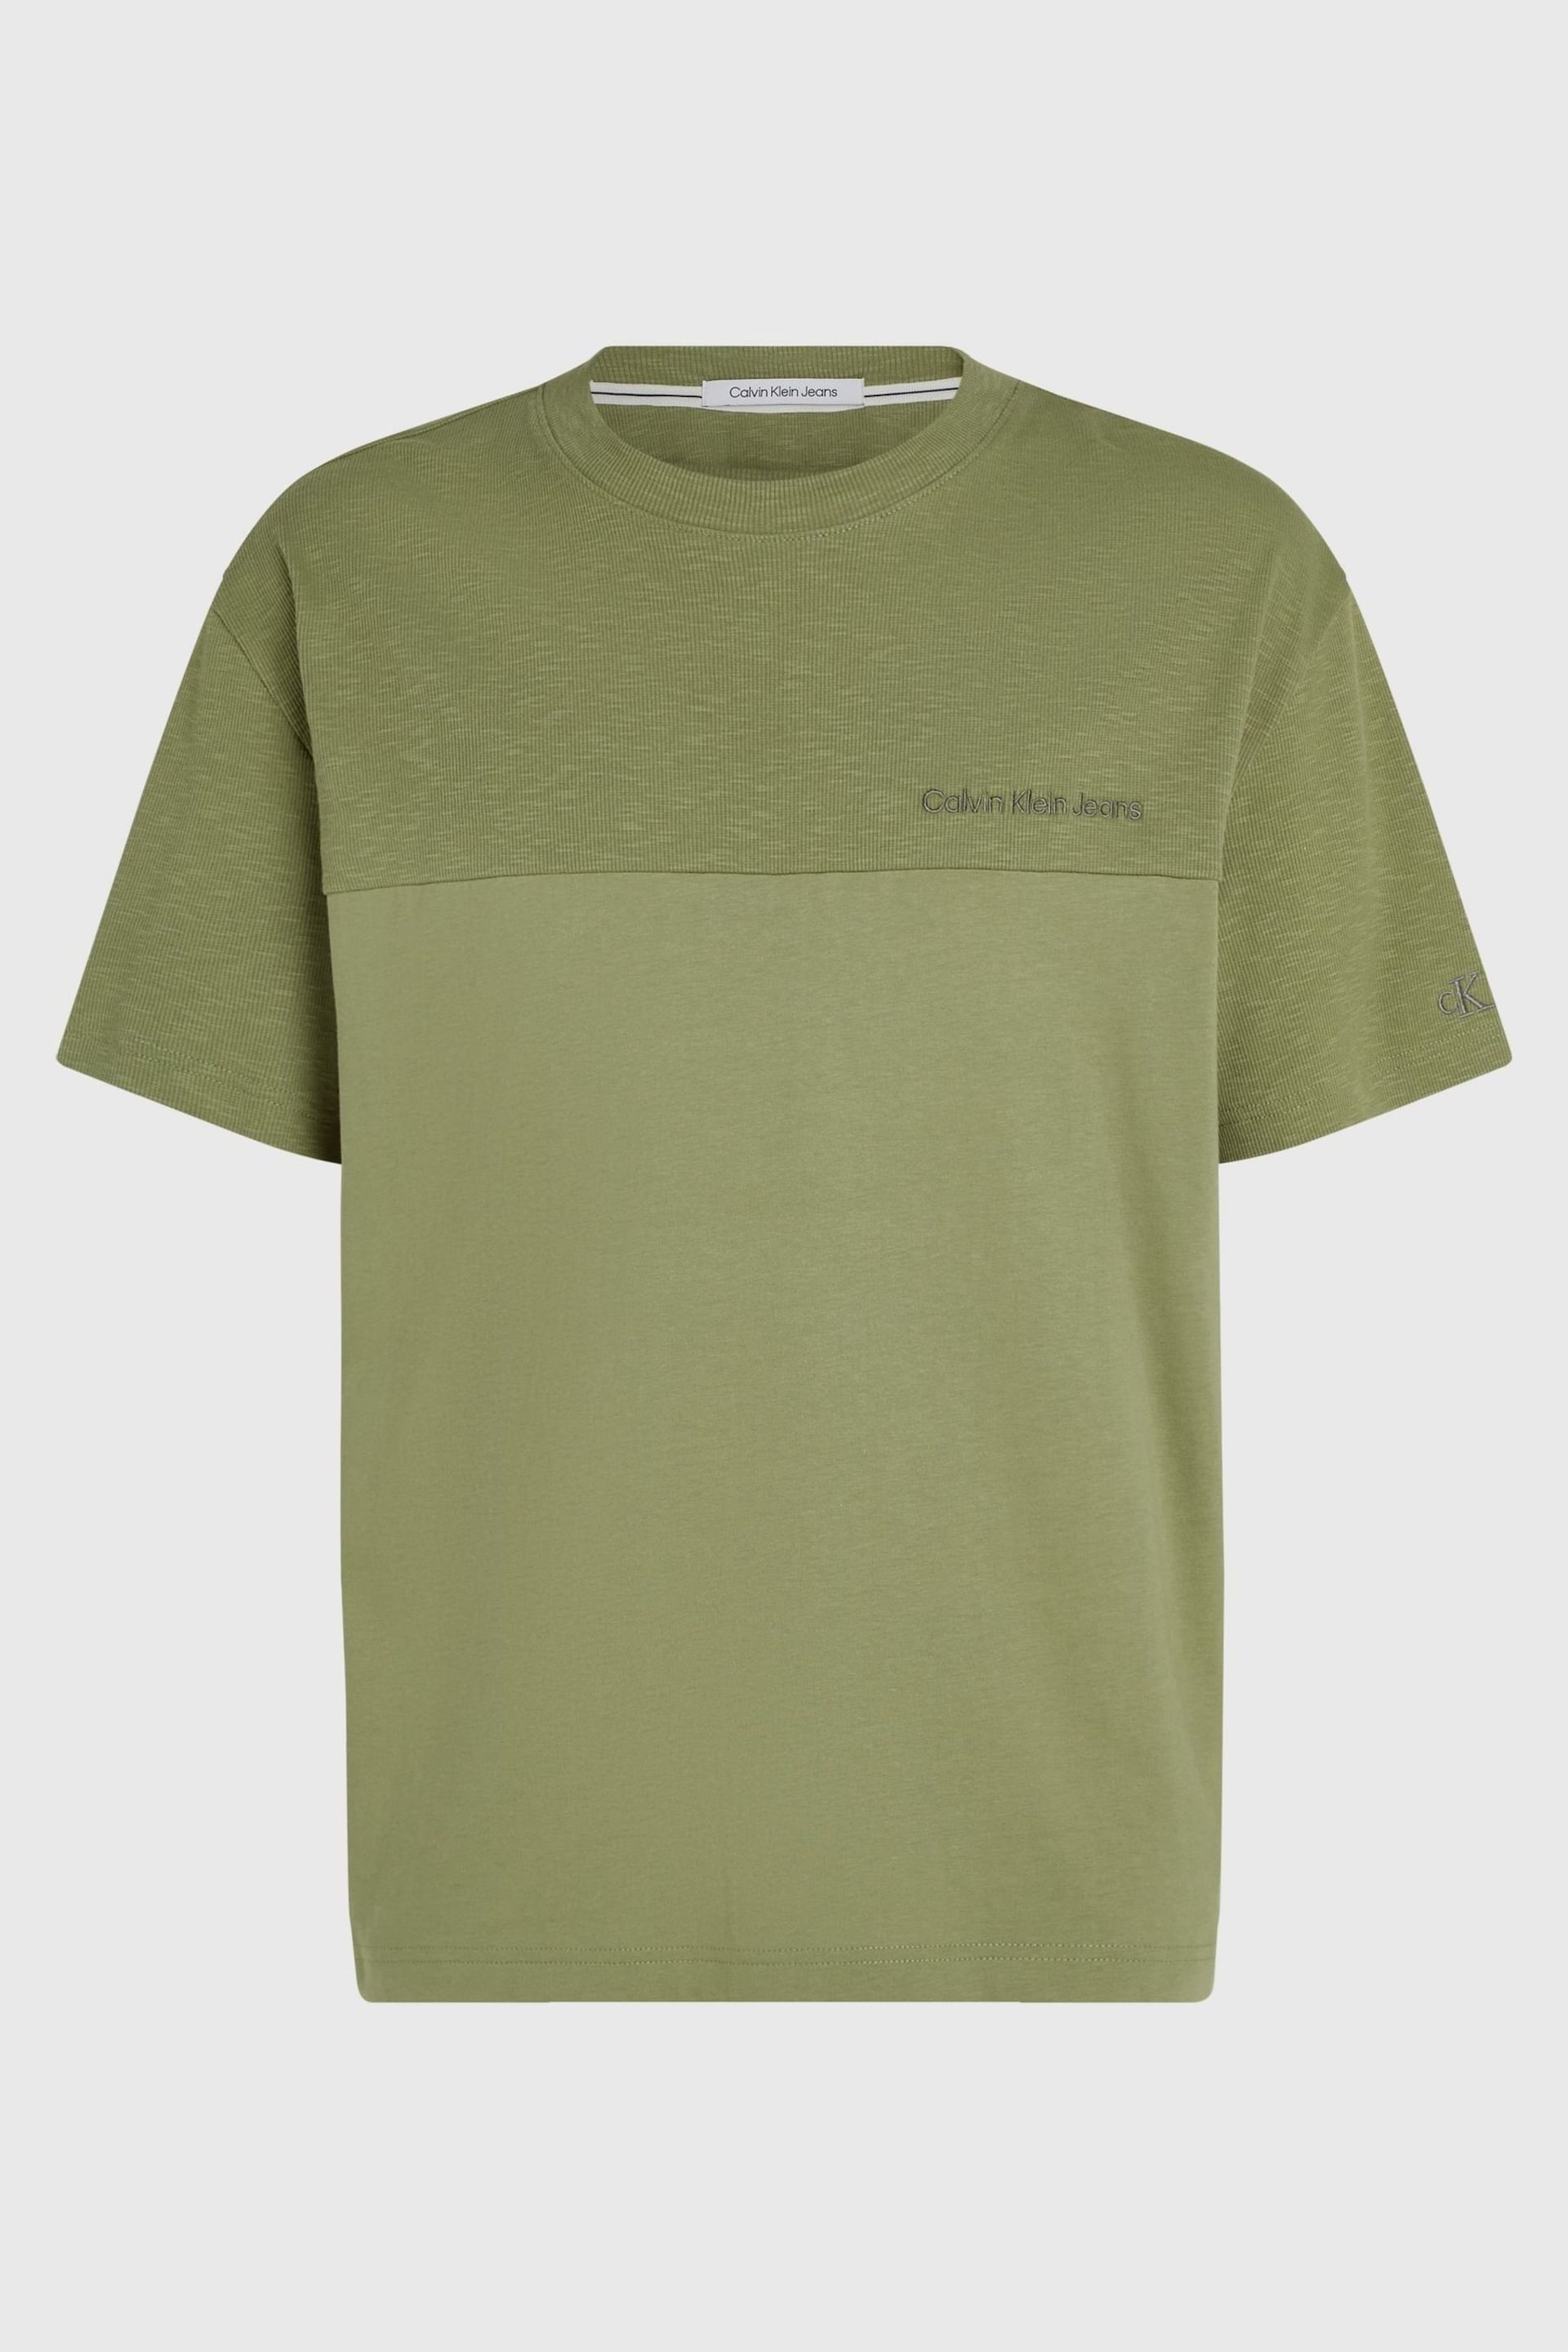 Calvin Klein Green Cut And Sew Logo T-Shirt - Image 3 of 3